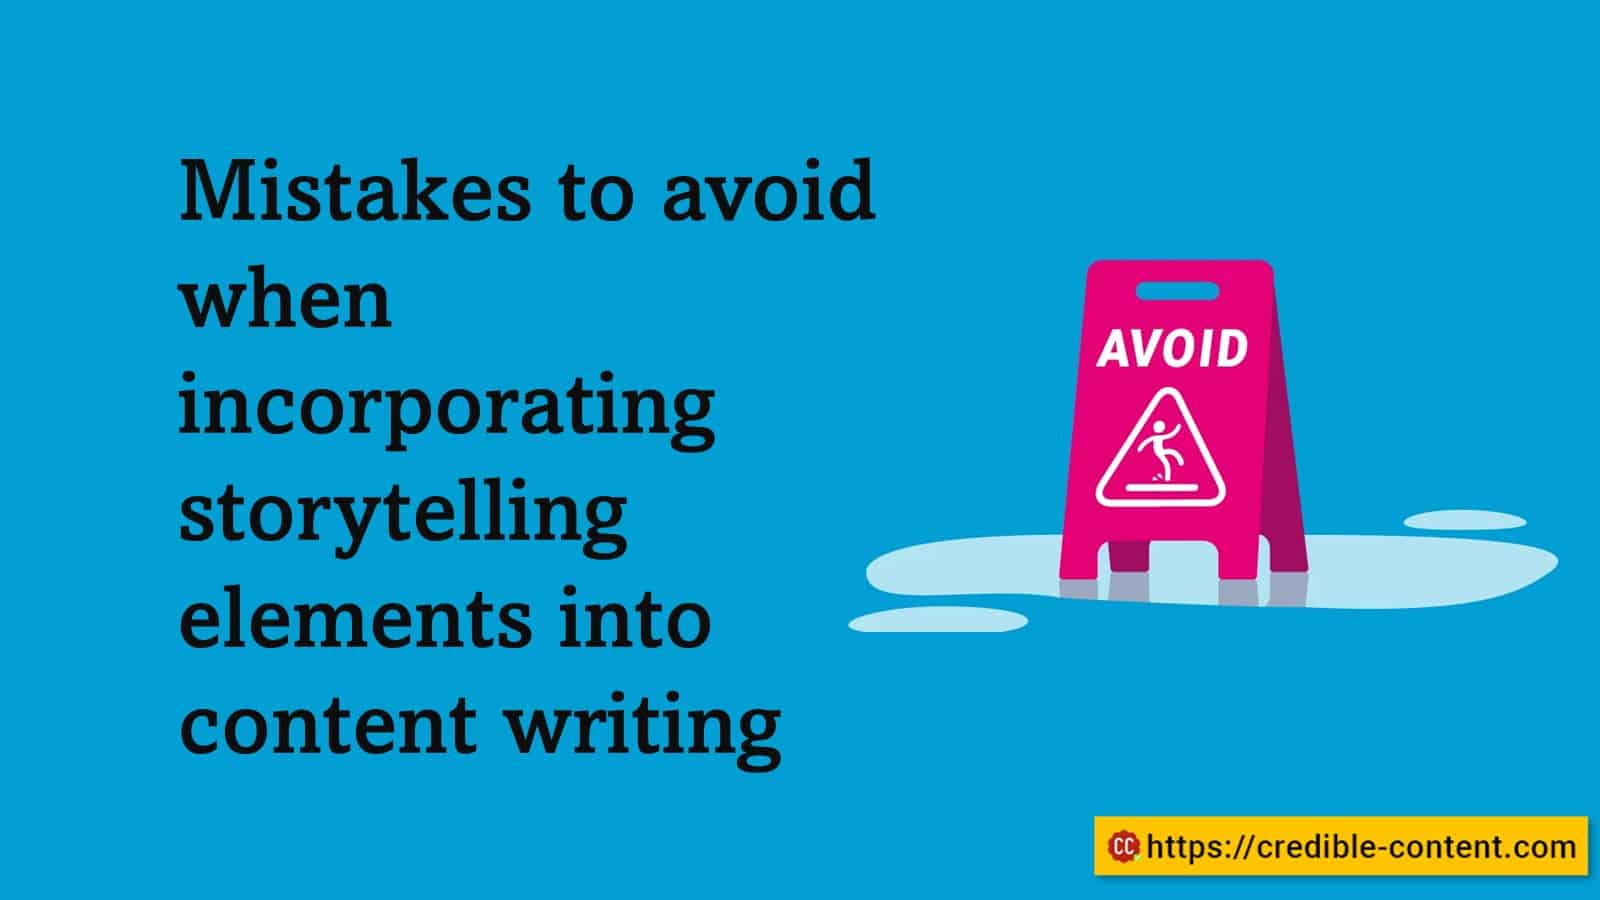 Mistakes to avoid when incorporating storytelling elements into content writing